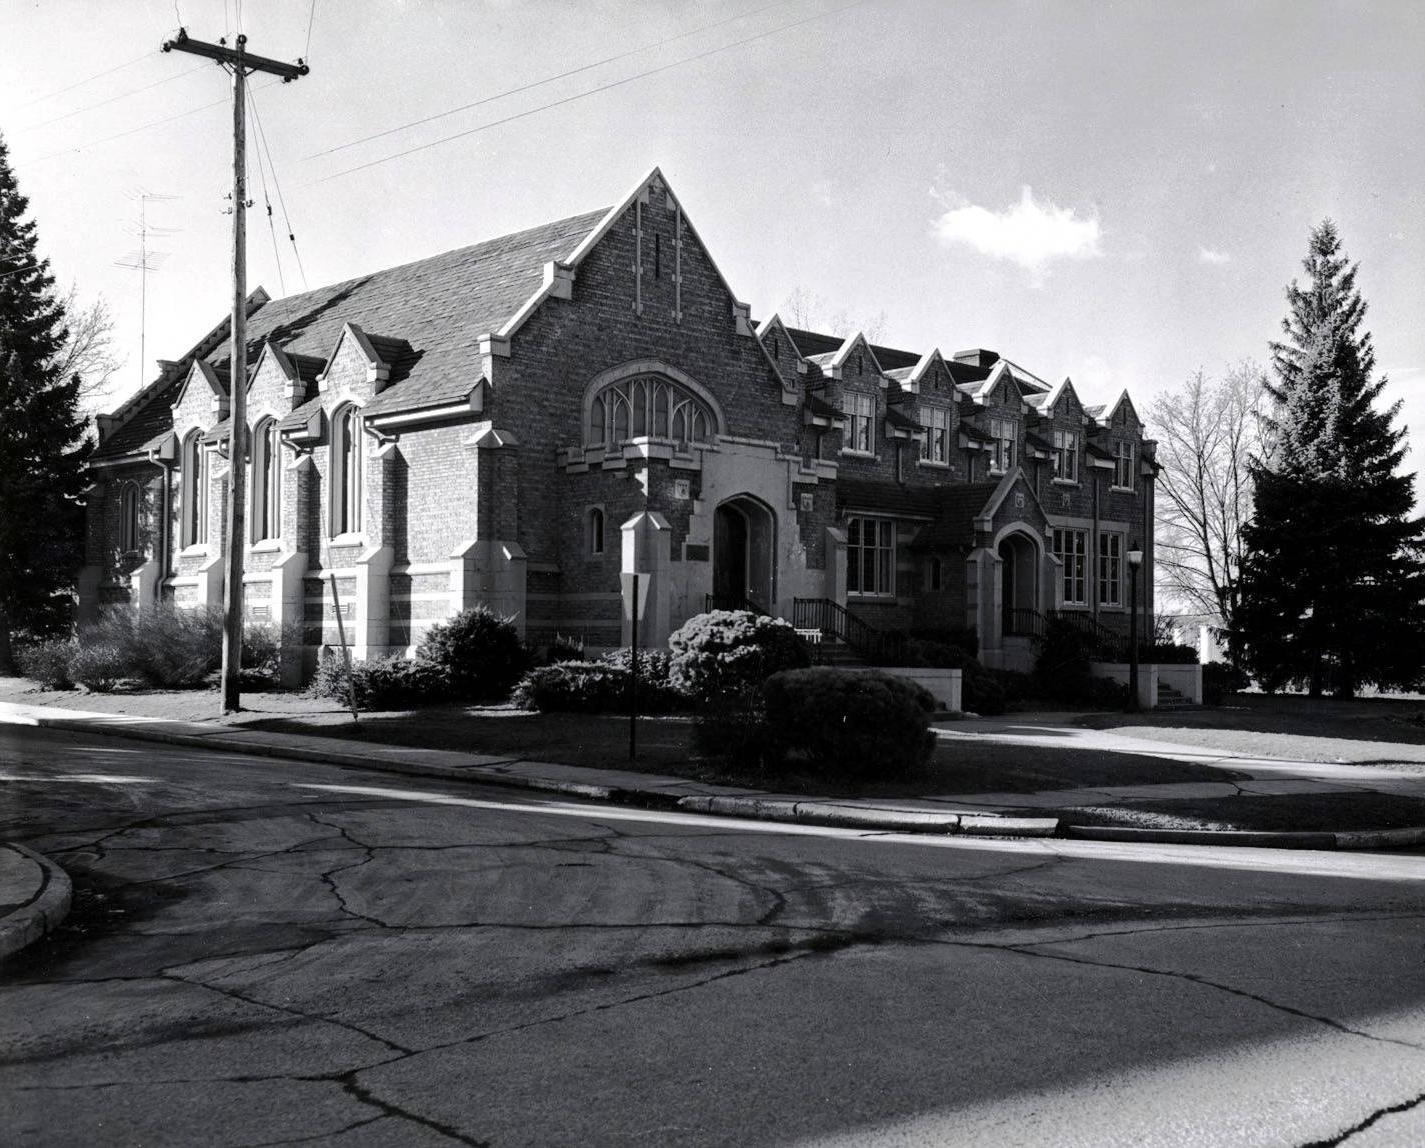 A black and white image of the Church of Jesus Christ of Latter-day Saints Institute of Religion